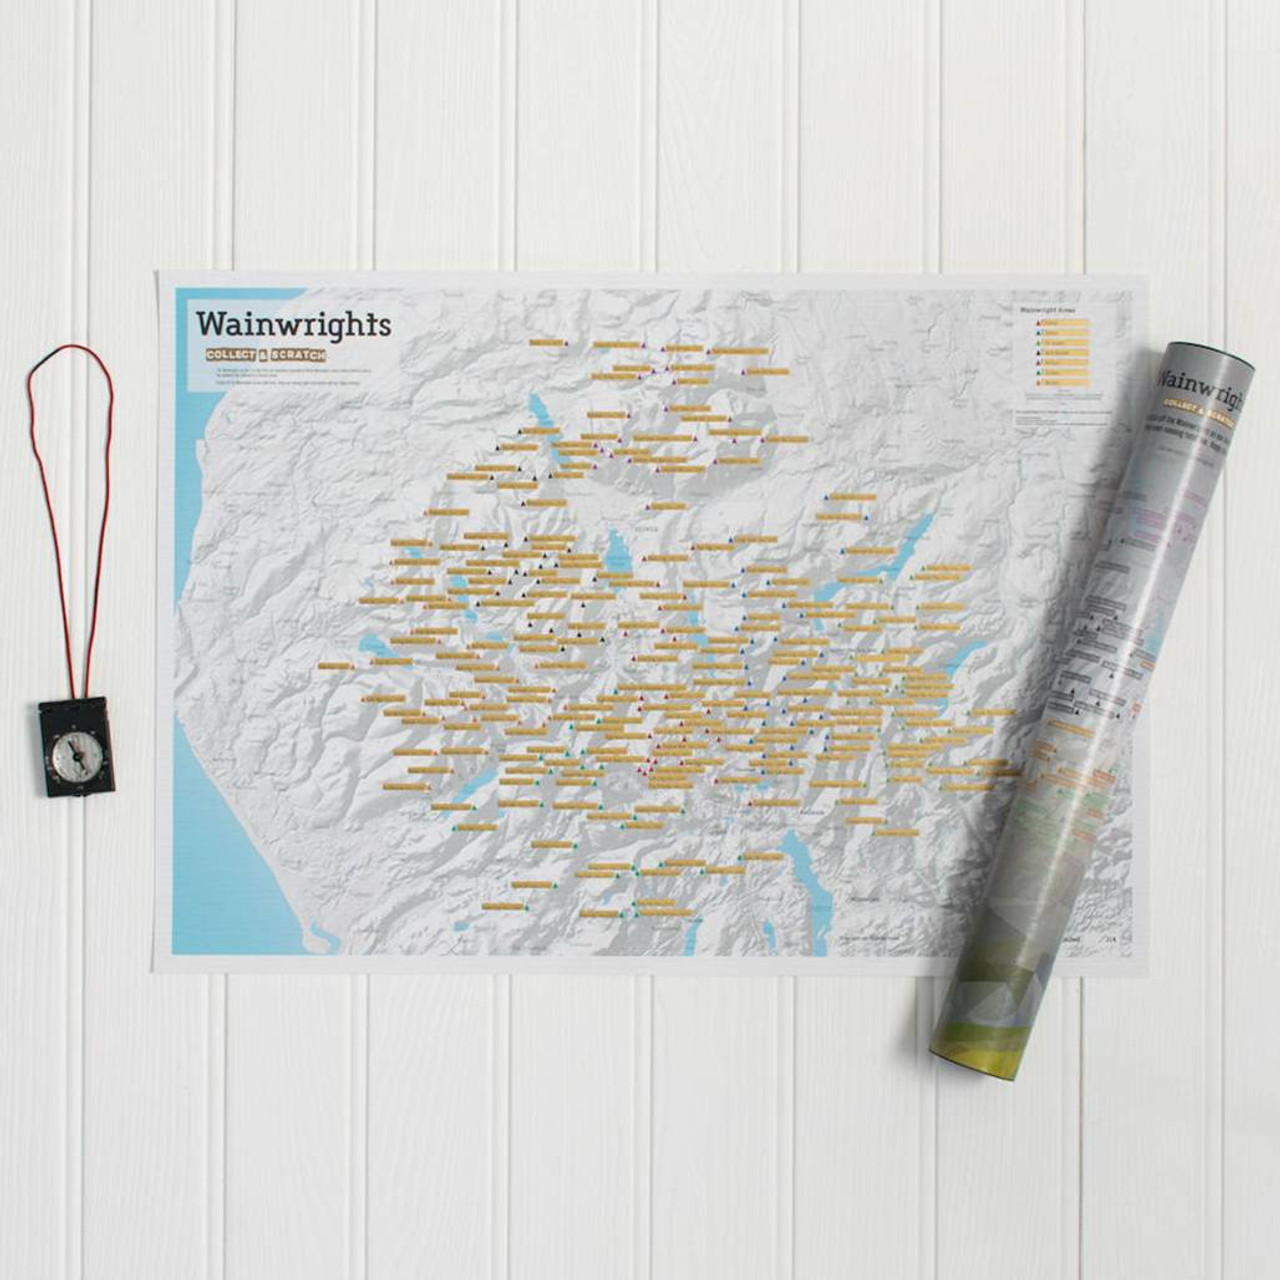 Wainwright Bagging CollectandScratch Off Map